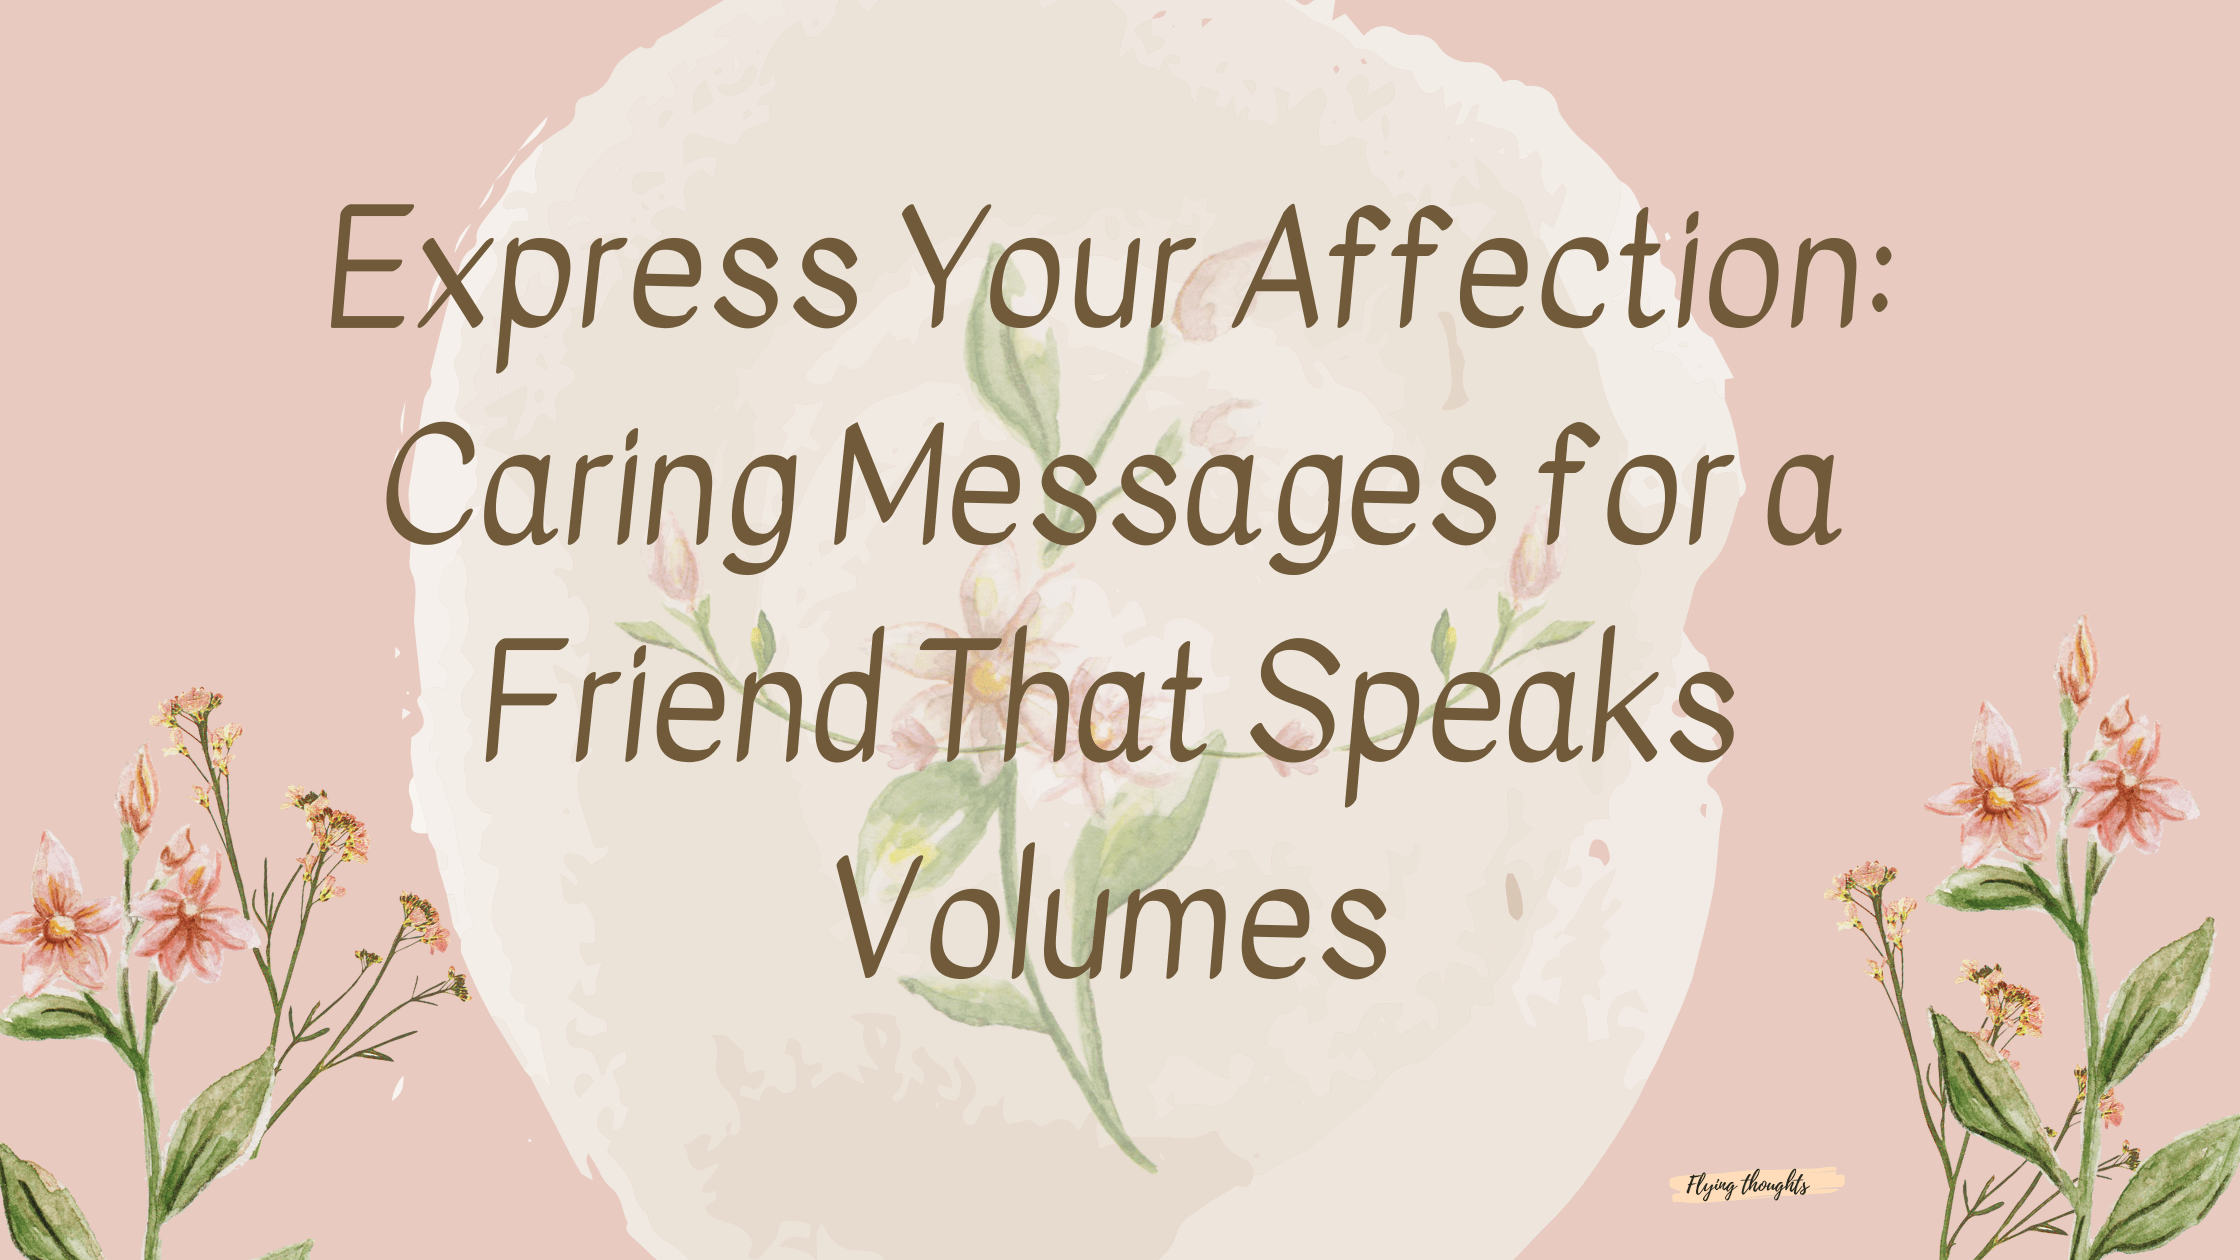 Express Your Affection: Caring Messages for a Friend That Speaks Volumes